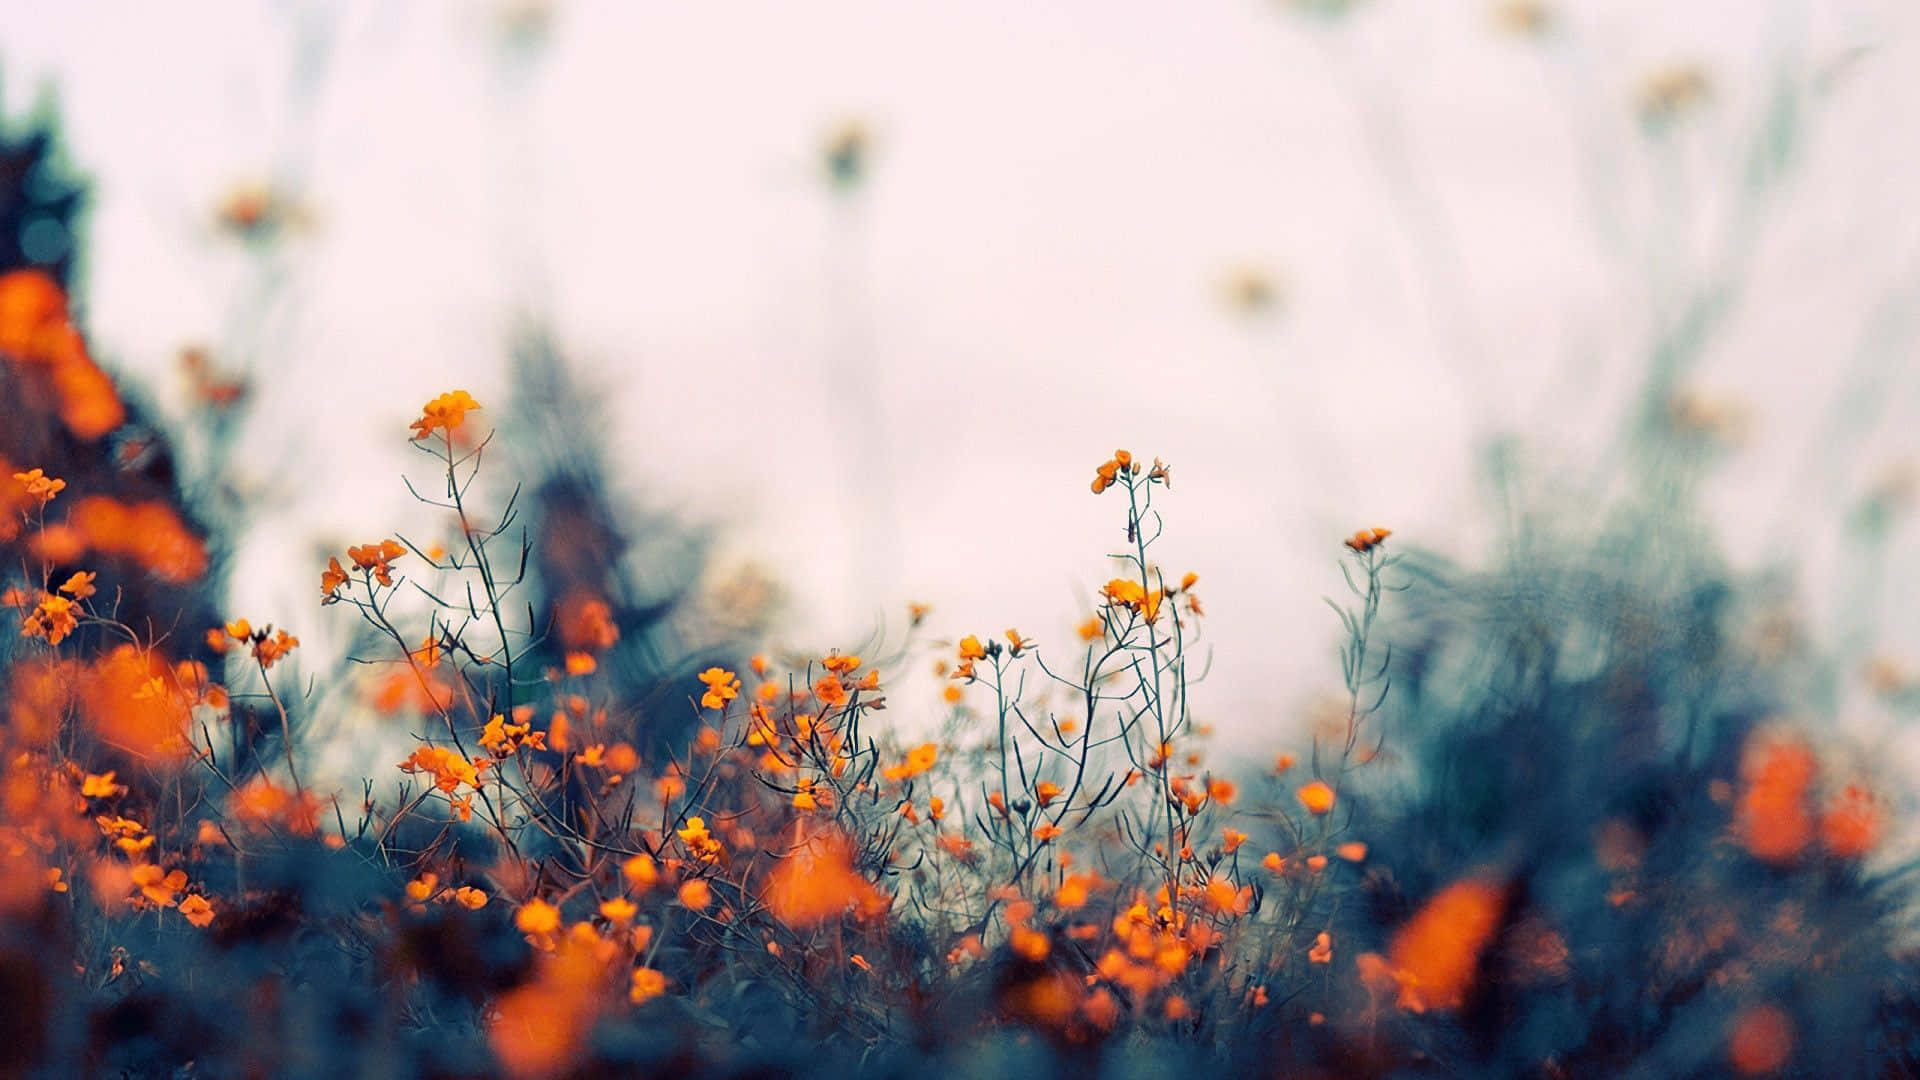 Orange Flowers In The Field With Blurry Background